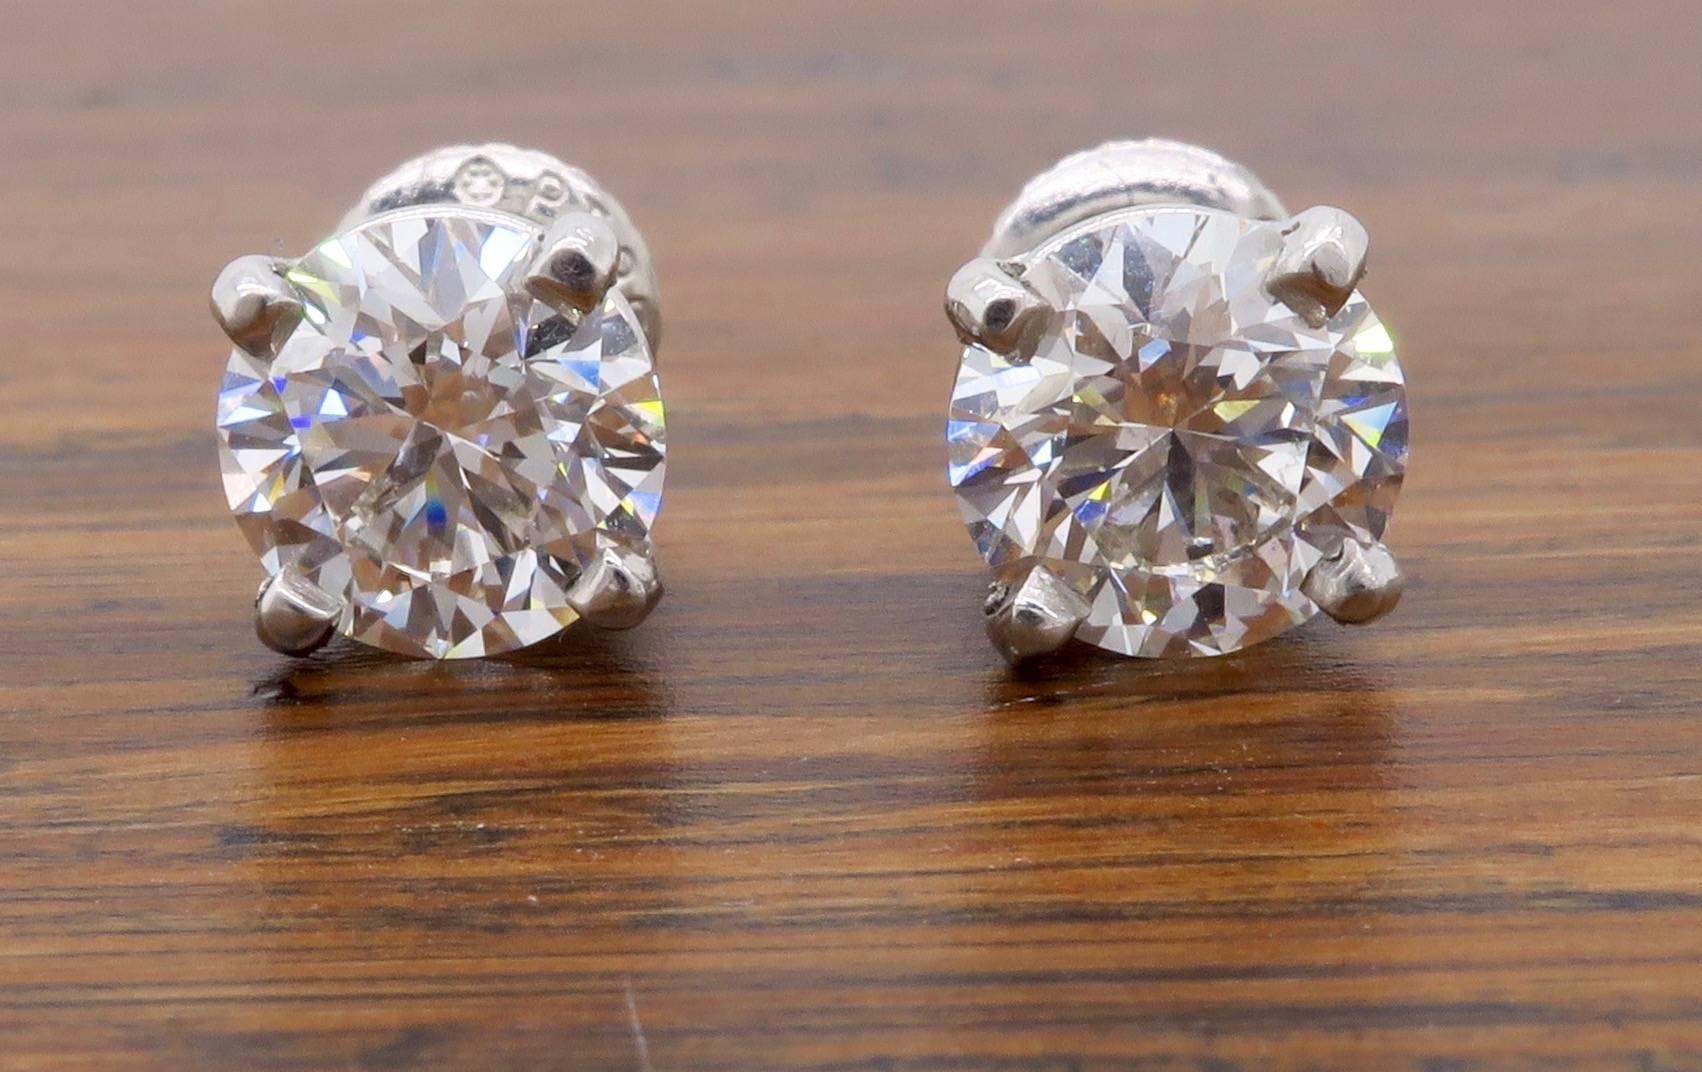 These classic studs featured two AGS Certified Hearts On Fire Diamonds. One diamond weighs 1.03CT the other diamond weighs 1.04CT. The stunning diamonds have G color and SI2 clarity. There is 2.07CTW of diamonds in this beautiful pair. The platinum